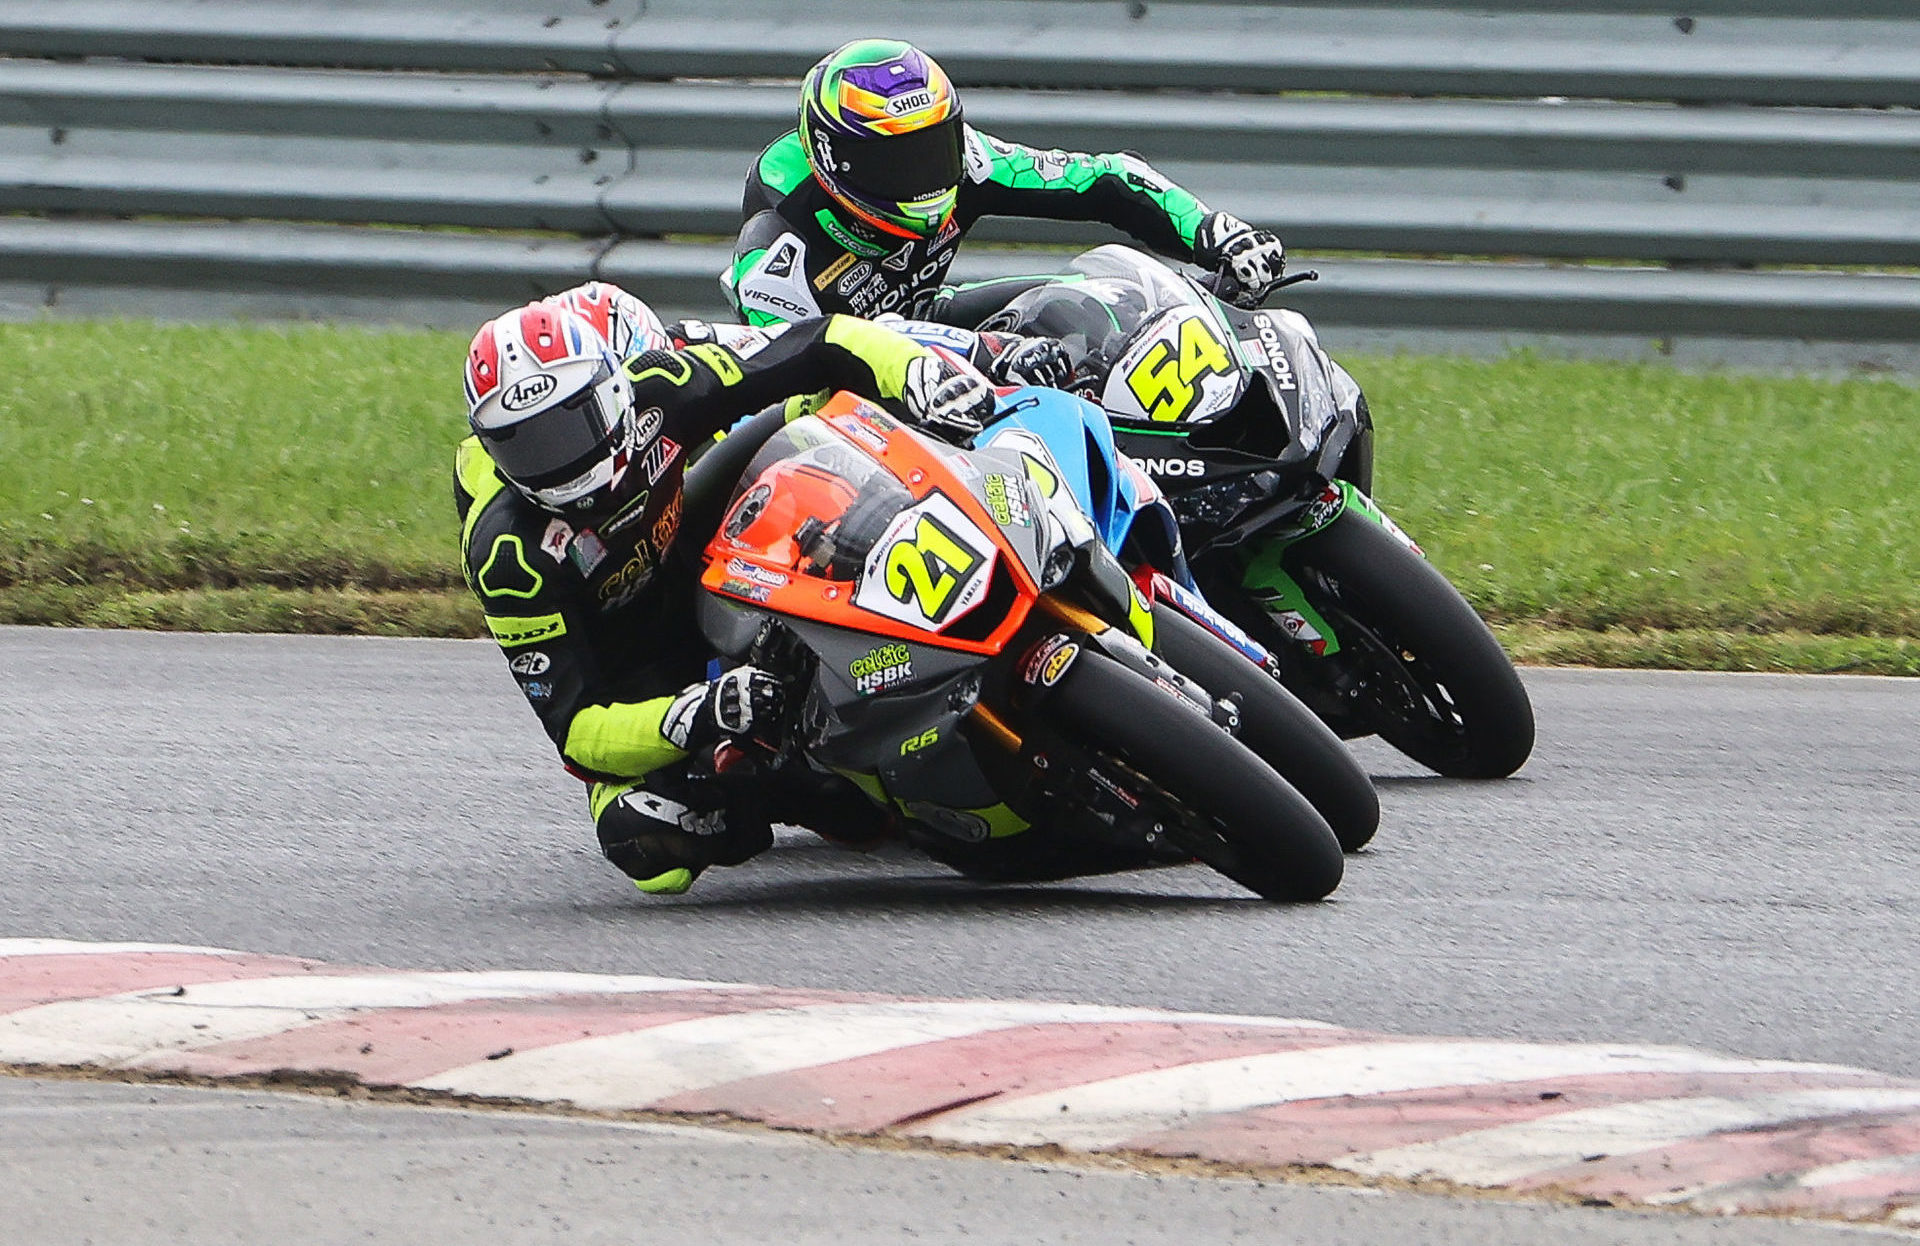 New Jersey's own Brandon Paasch (21) stuffs it under Sean Dylan Kelly (40) who was already under Richie Escalante (54) in Supersport Race Two, one of the best Supersport battles seen in decades. Photo by Brian J. Nelson.